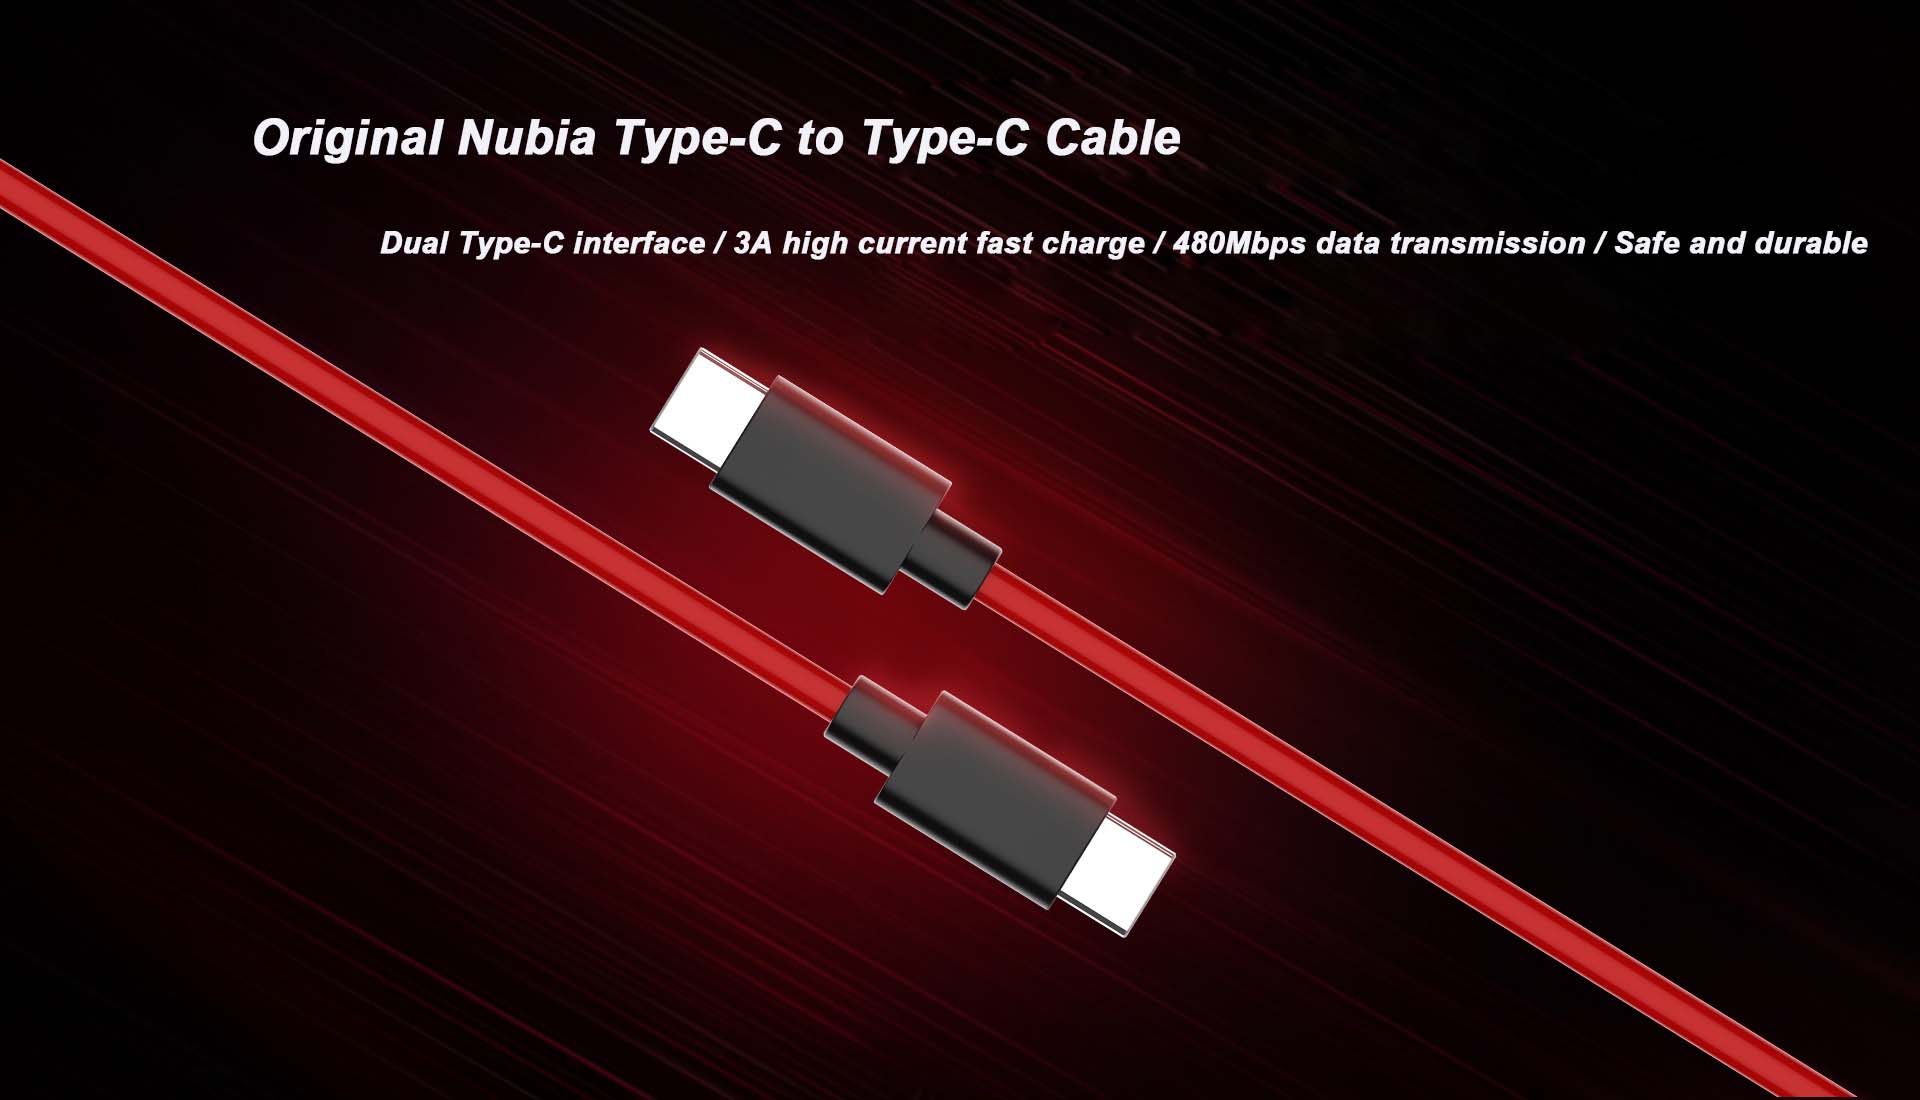 Nubia cable